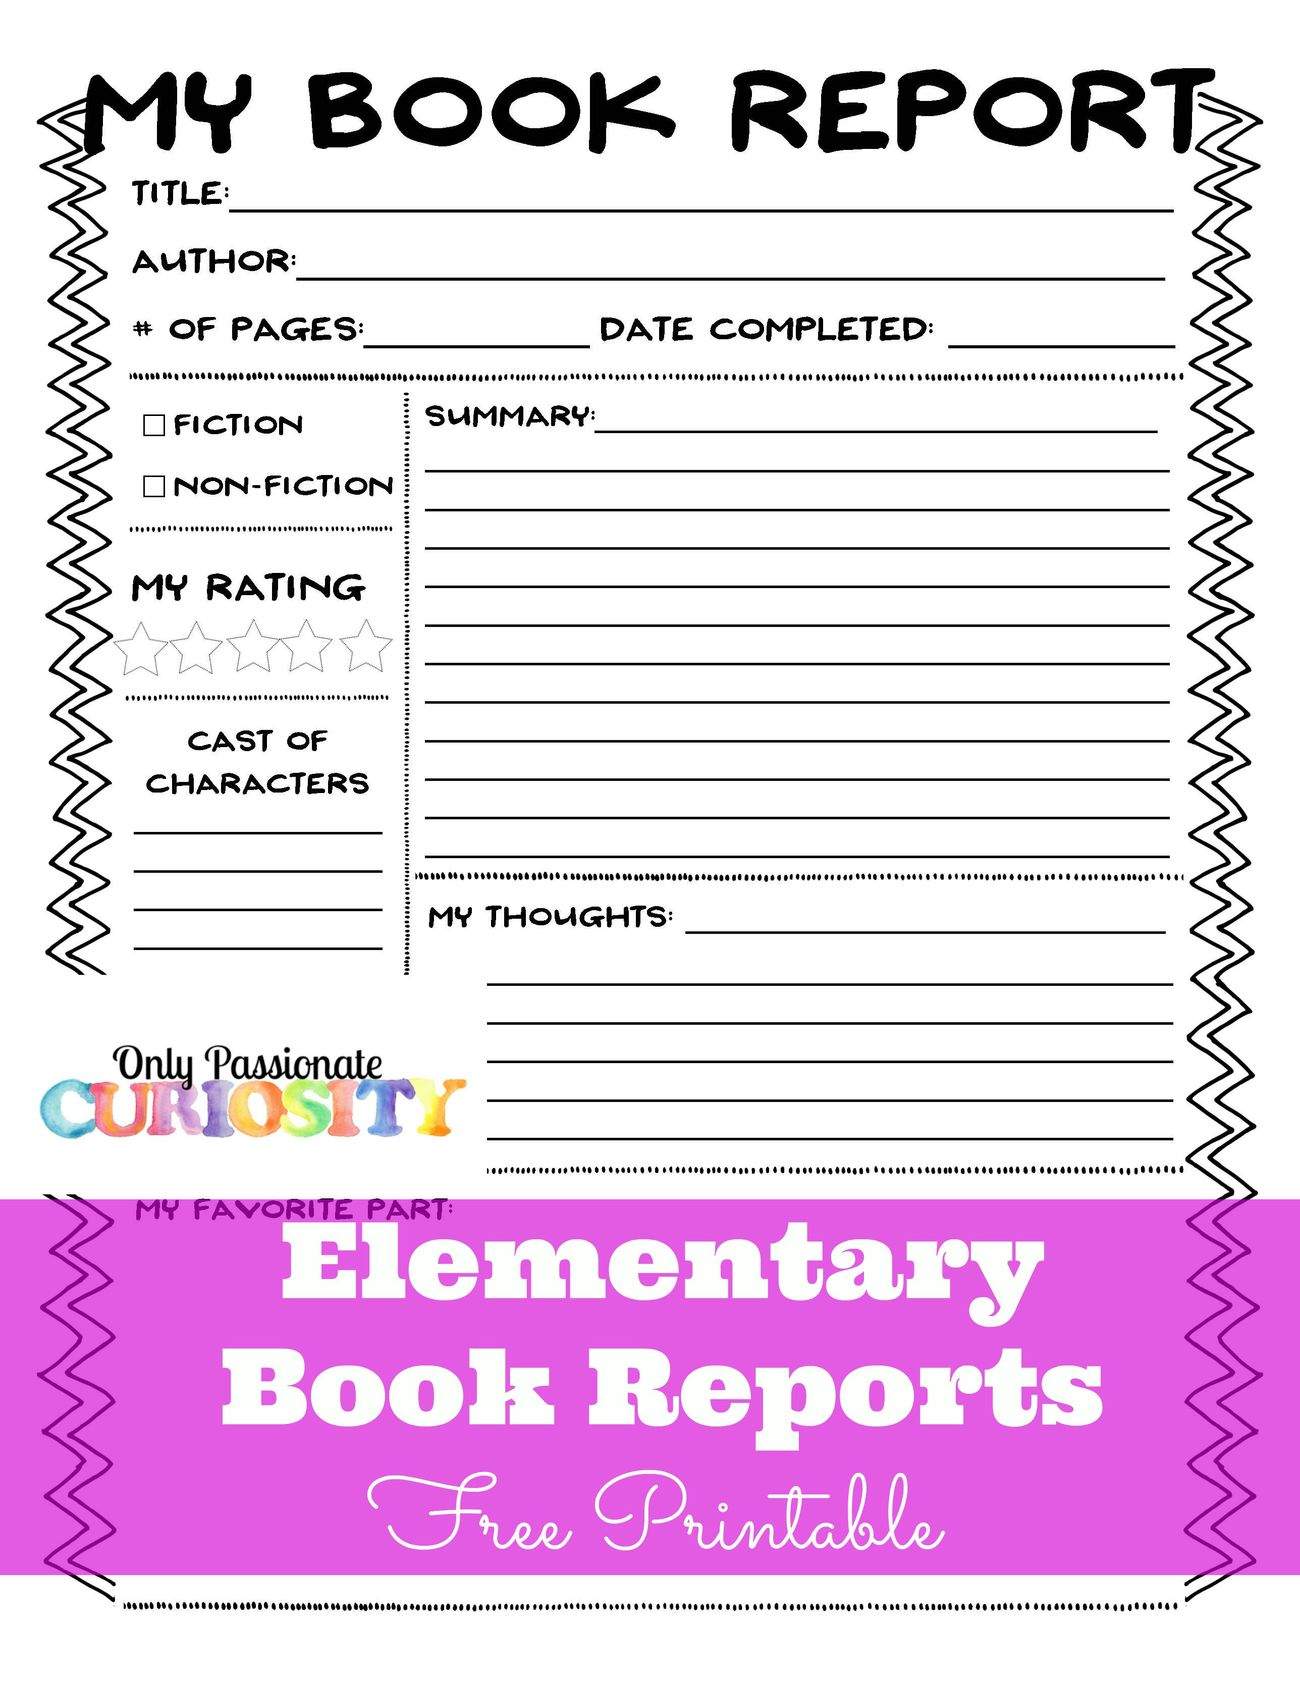 Elementary Book Reports Made Easy Only Passionate Curiosity